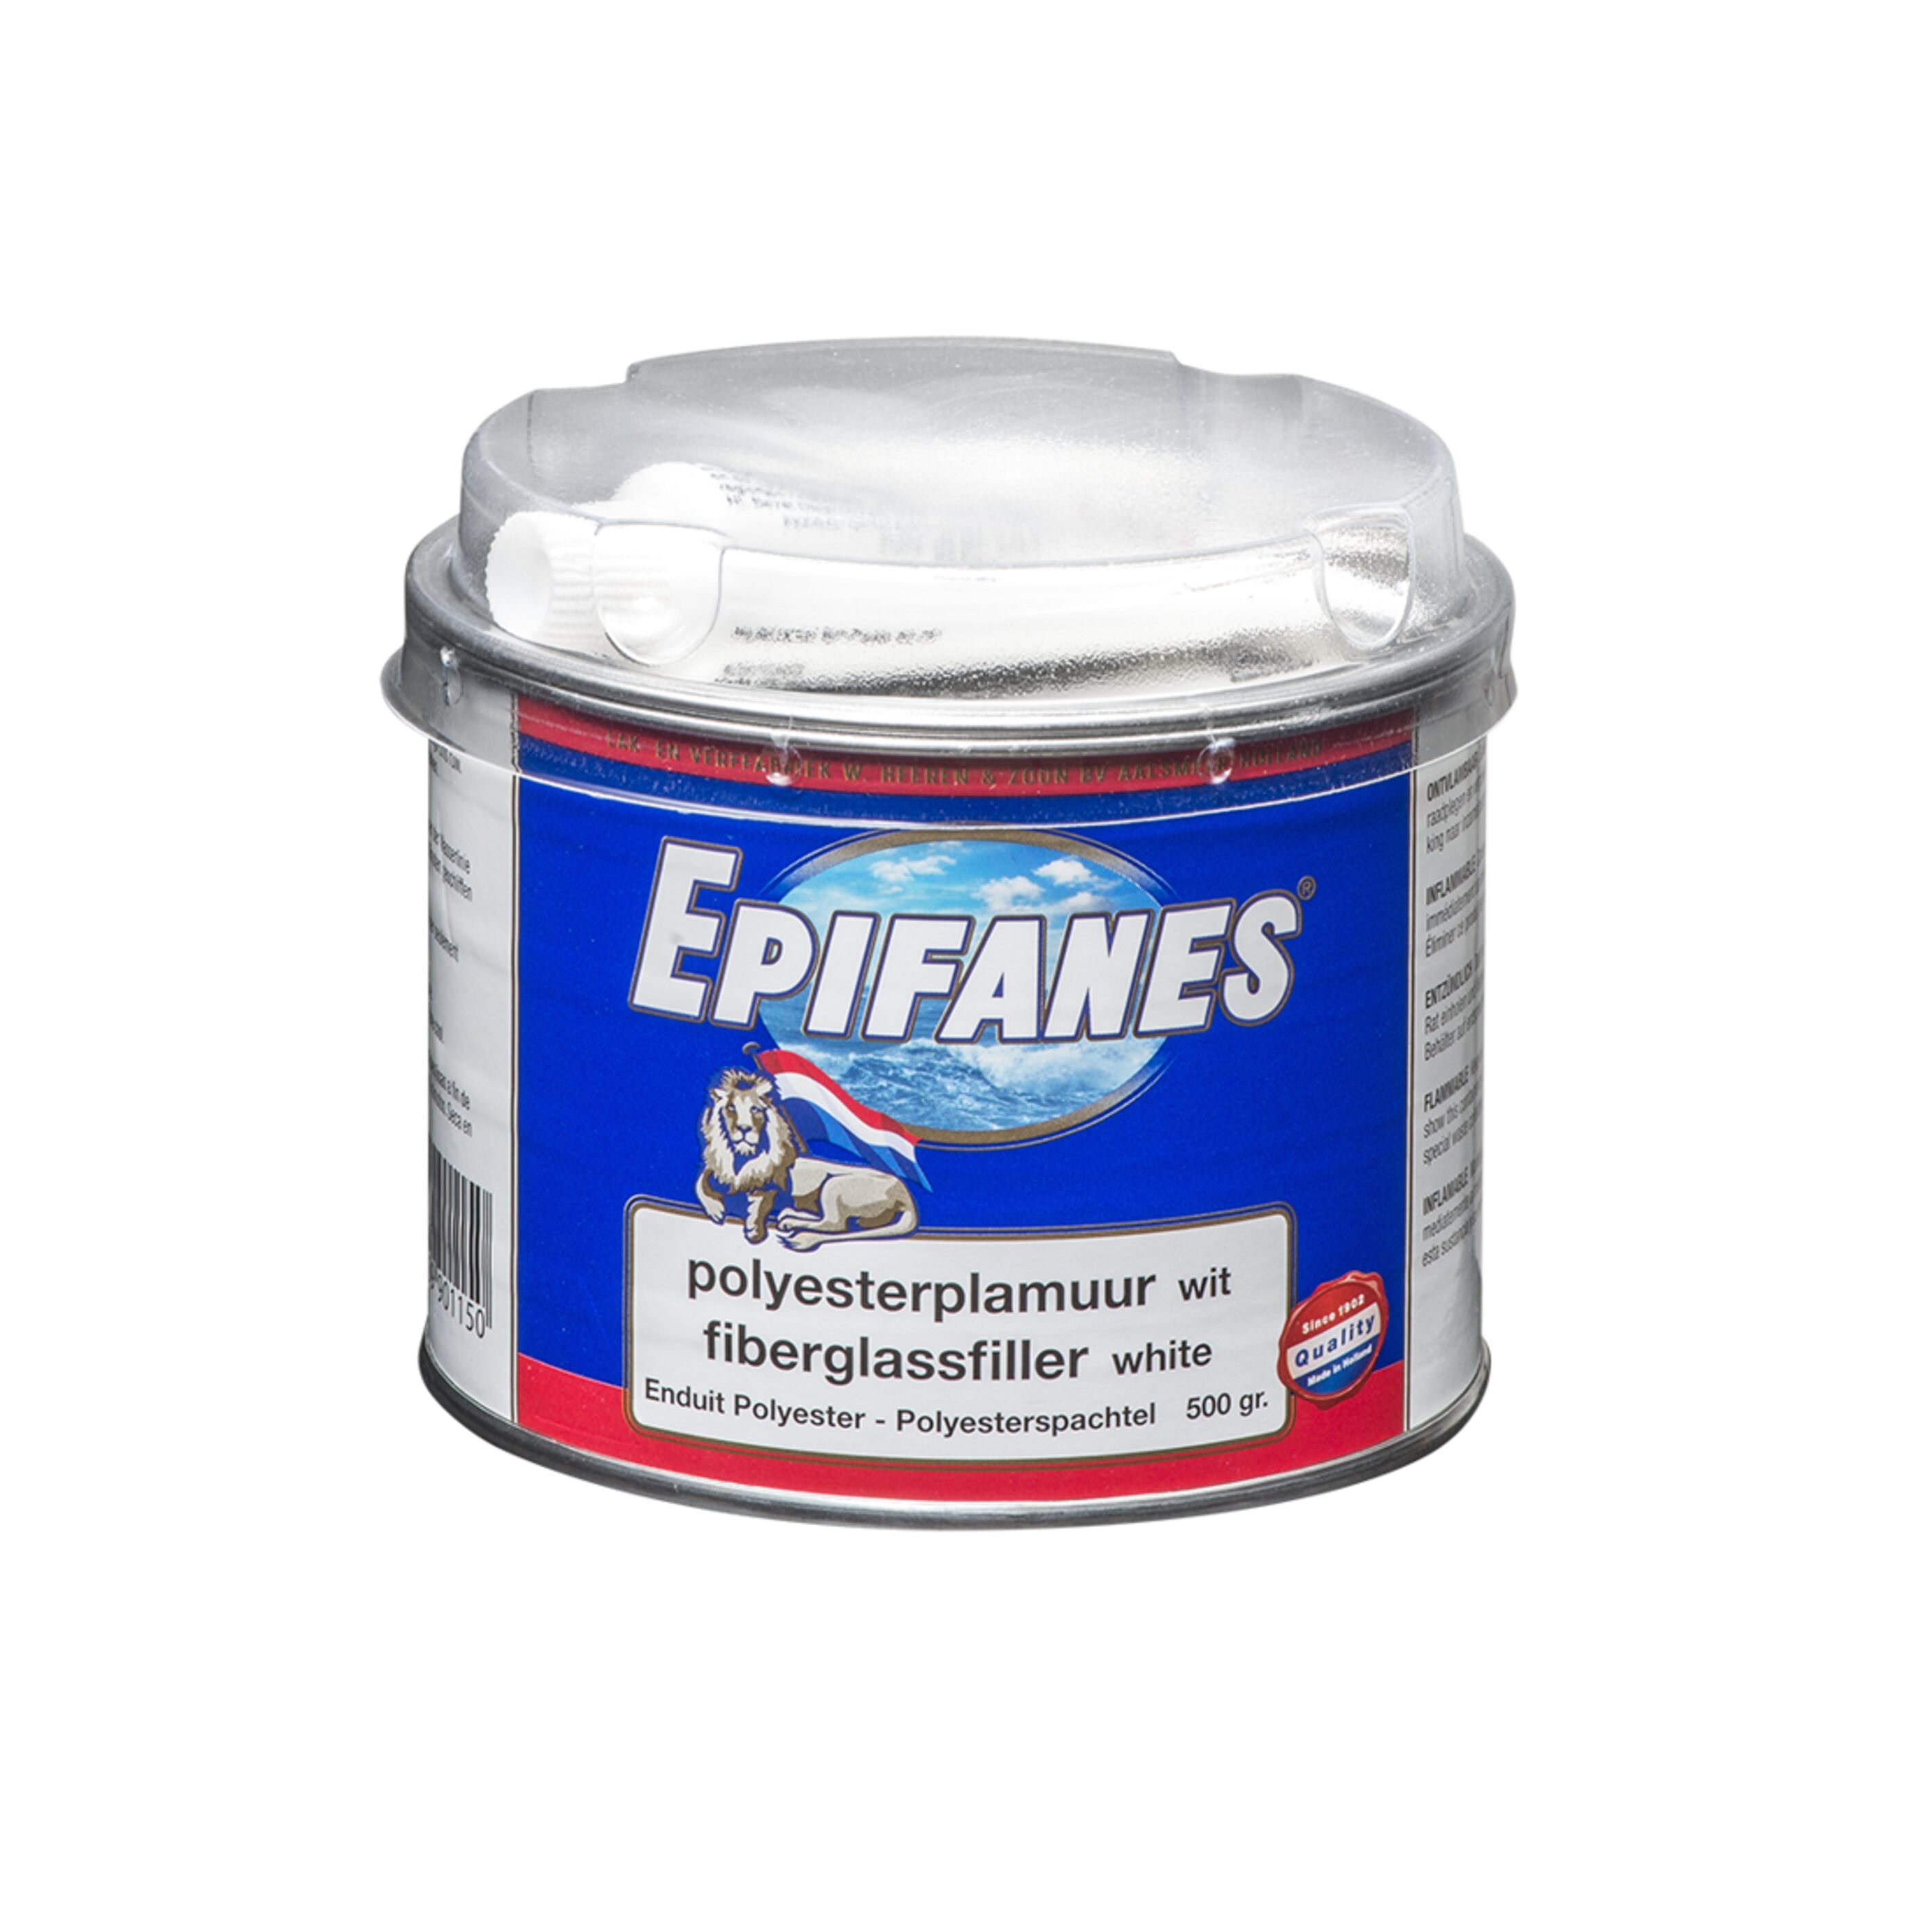 EPIFANES Polyesterspachtel 500g